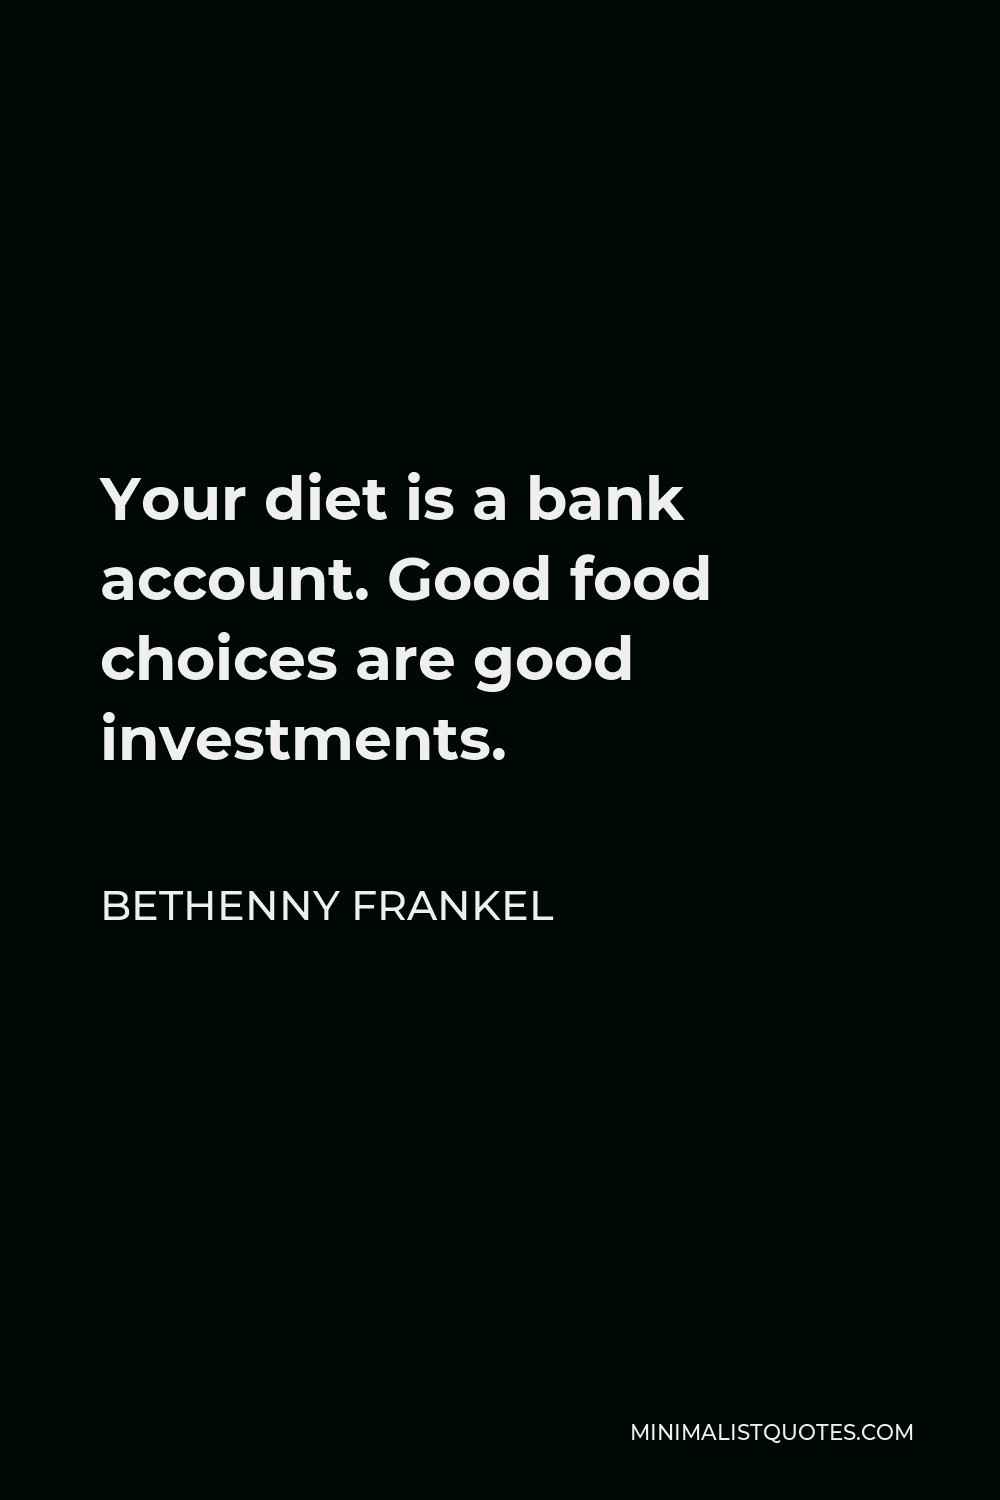 Bethenny Frankel Quote - Your diet is a bank account. Good food choices are good investments.